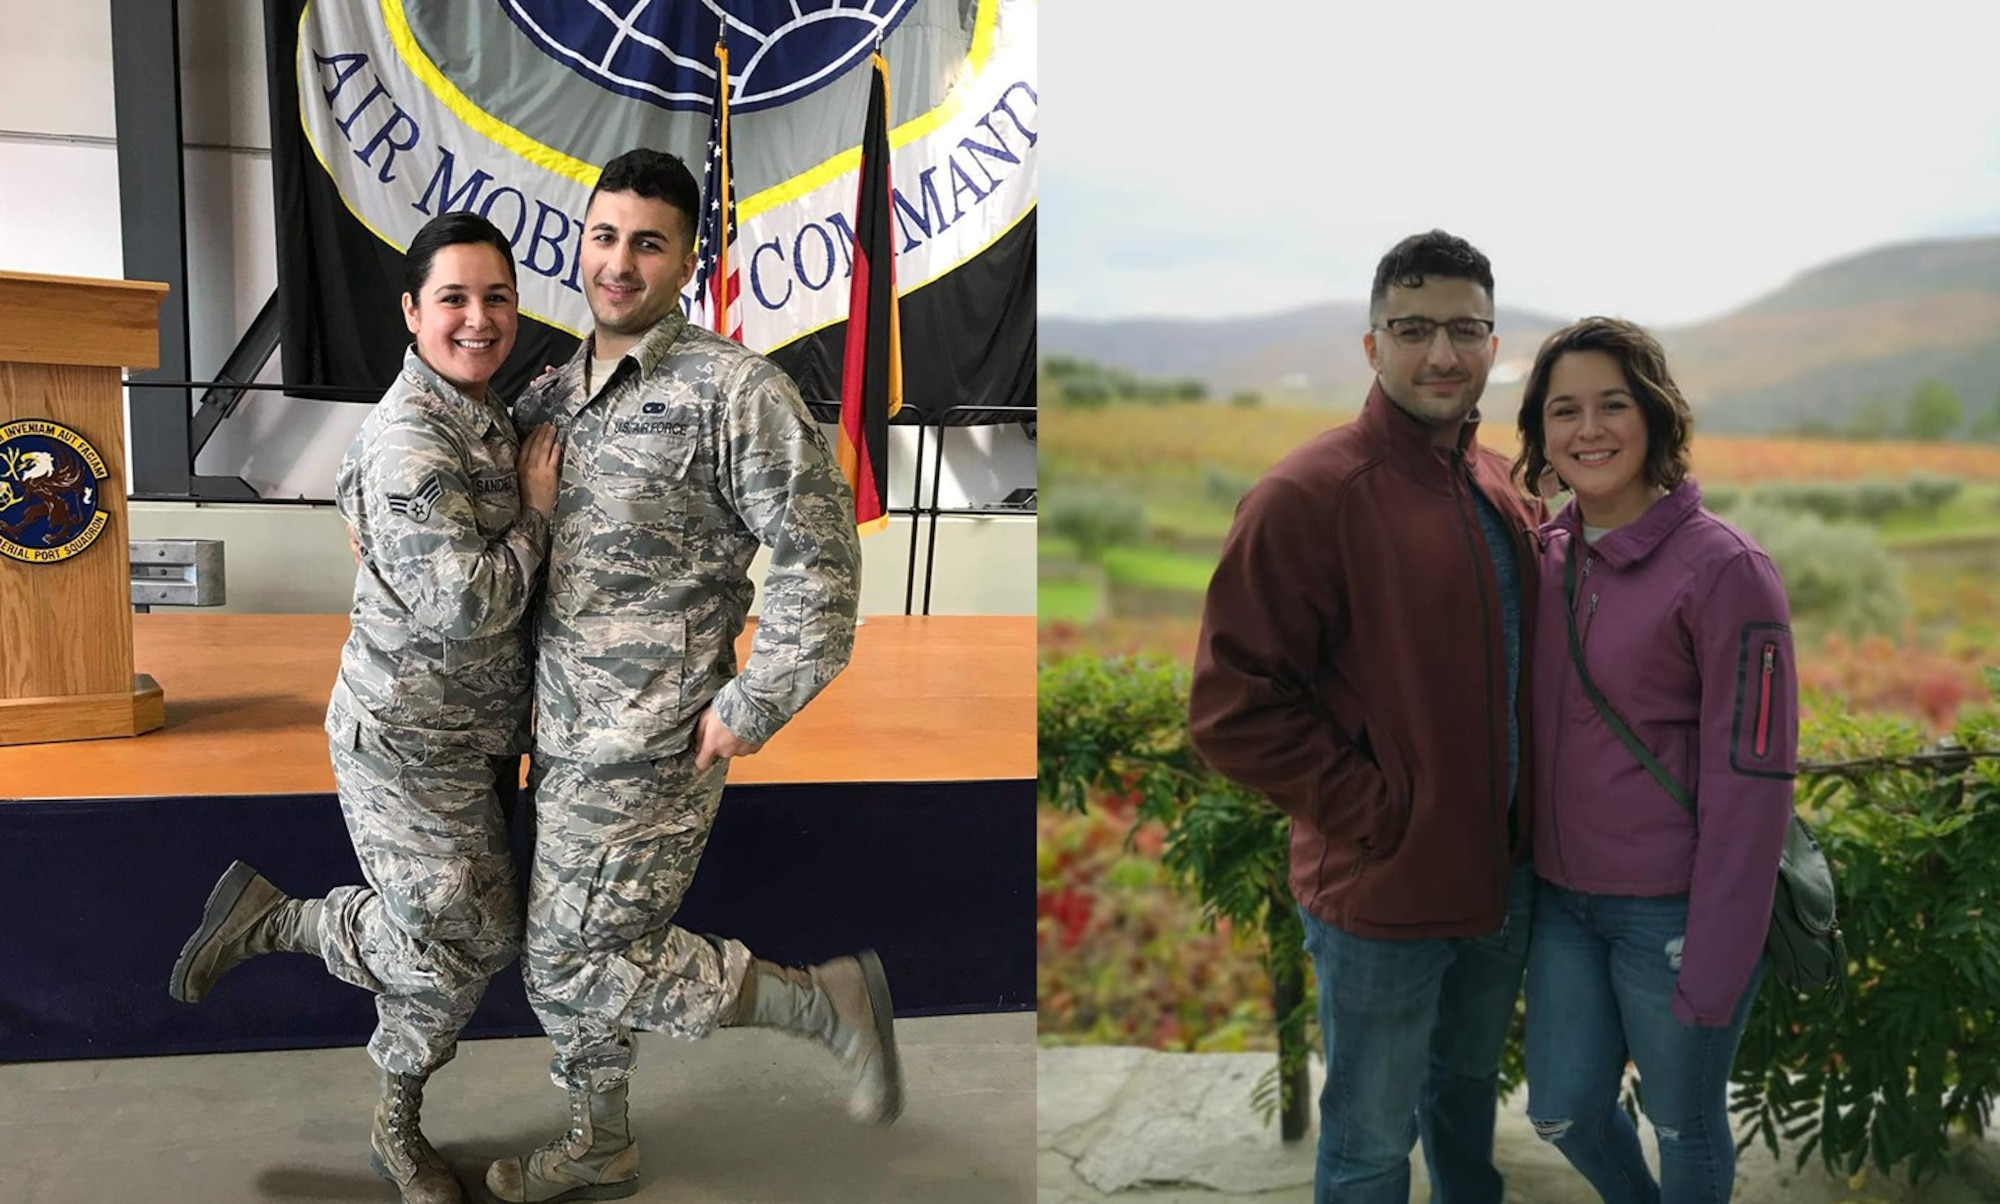 (Left) U.S. Air Force Staff Sgt. John Khandzhayan, a protocol liaison for the 86th Airlift Wing, poses with recently promoted Staff Sgt. Mariela Sanchez, at the 721st Aerial Port Squadron during his promotion to staff sergeant; and (right) the couple poses for a photo together while on vacation in 2019 in Porto, Portugal. (Courtesy photos)